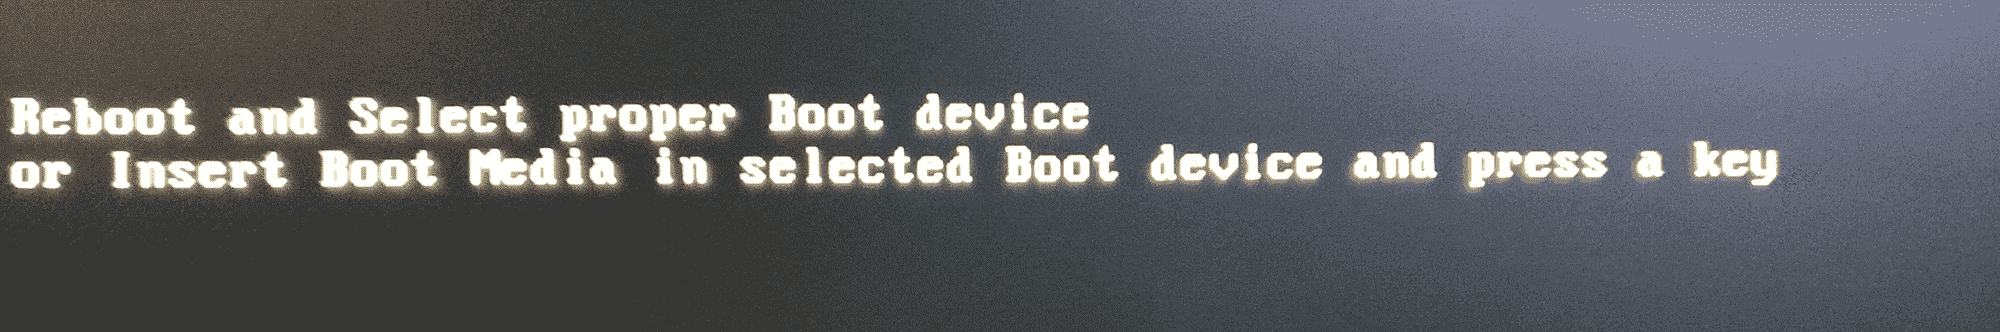 Windows 10 Reboot And Select Proper Boot Device